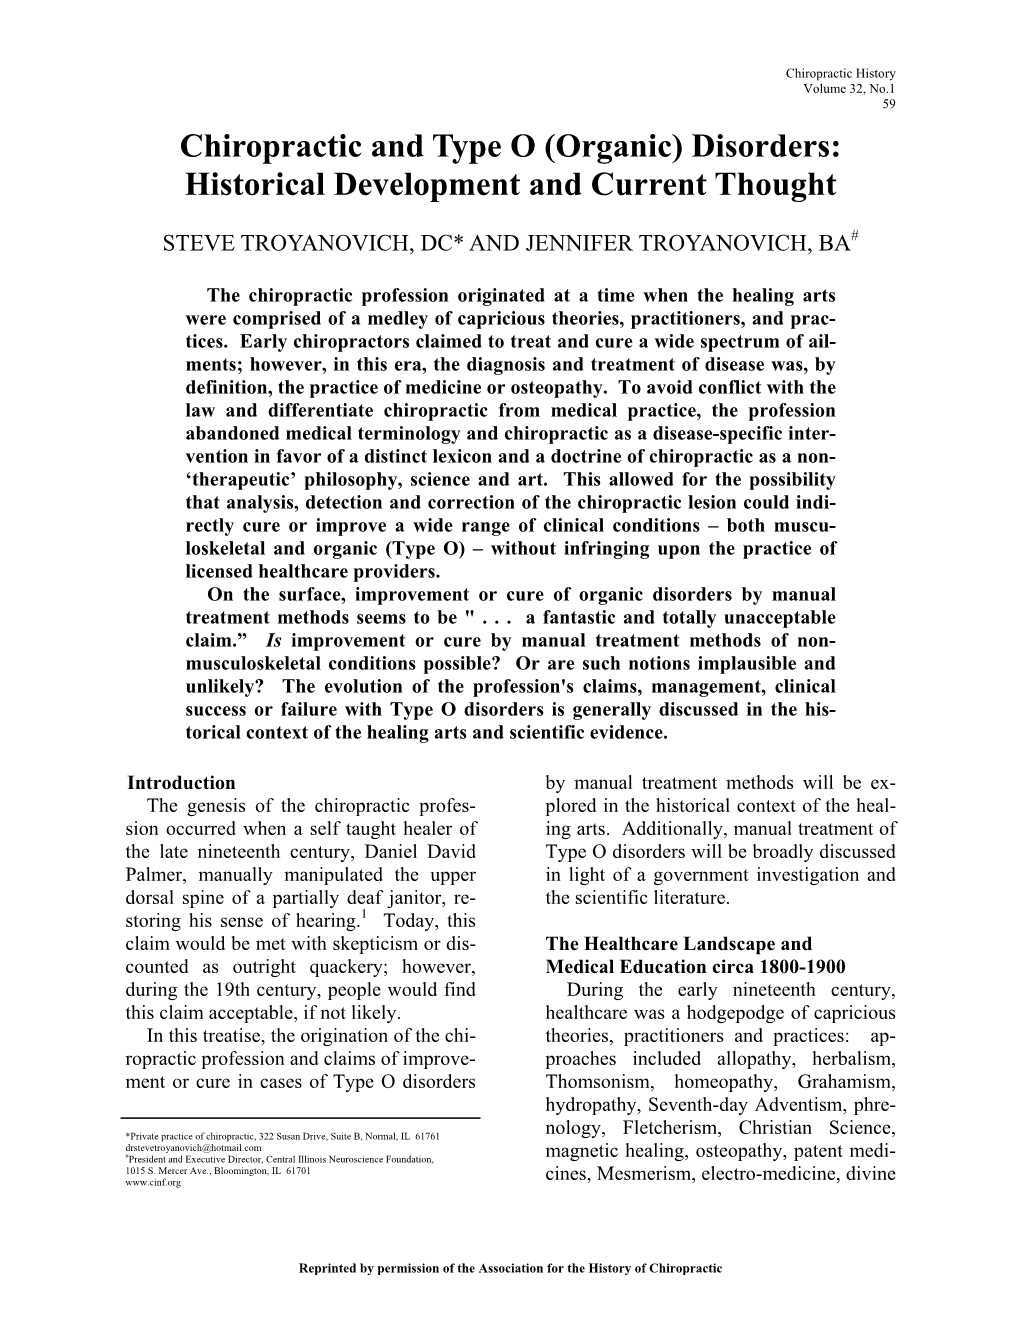 Chiropractic and Type O (Organic) Disorders: Historical Development and Current Thought